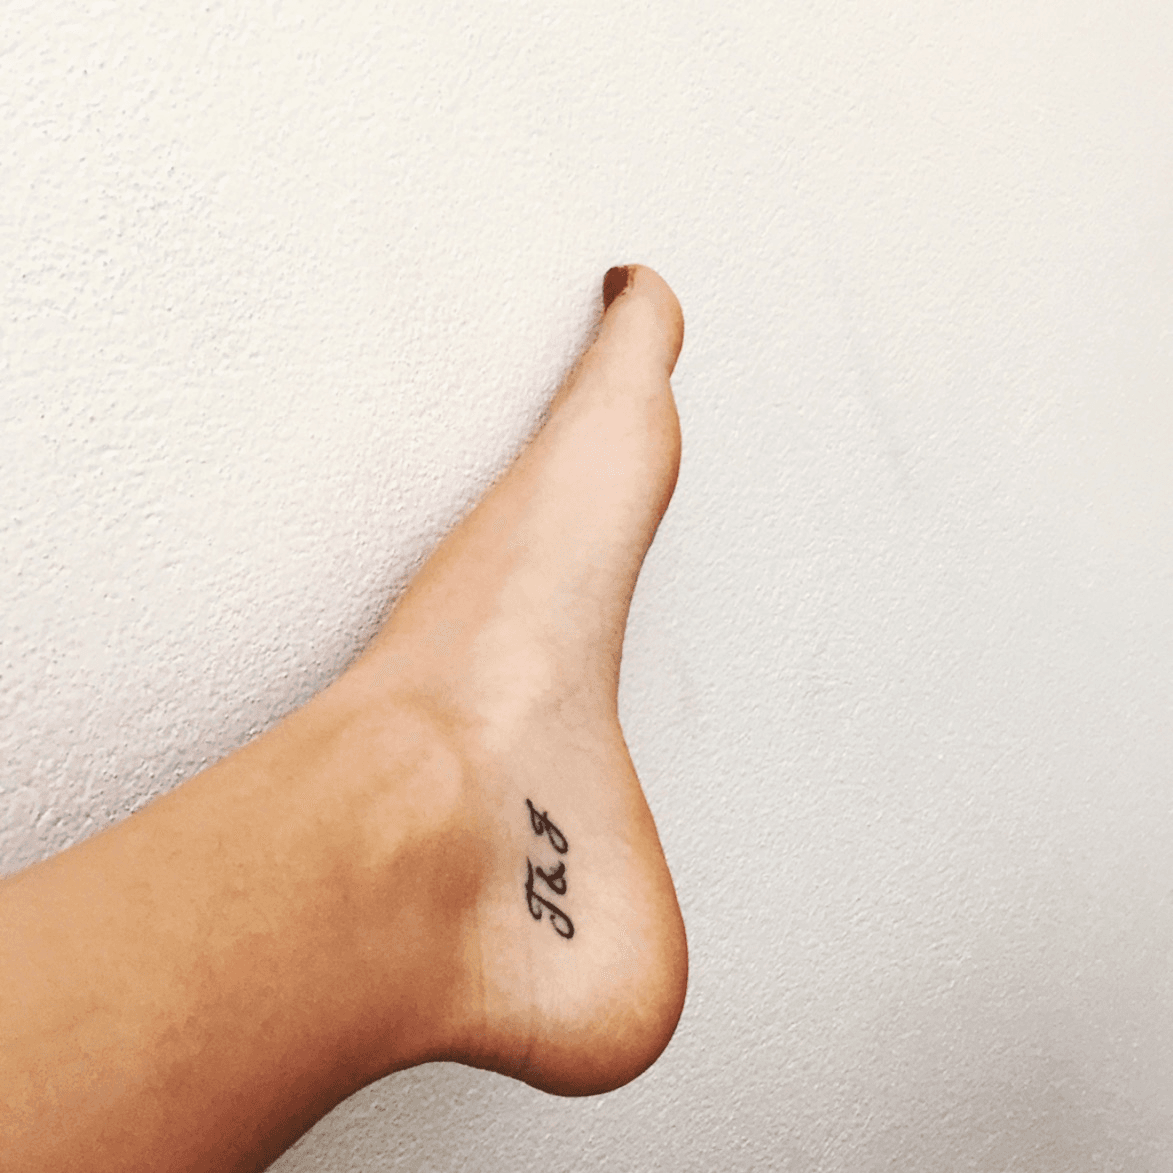 68 Stupefying Initial Tattoo Ideas To Show Your Affectio